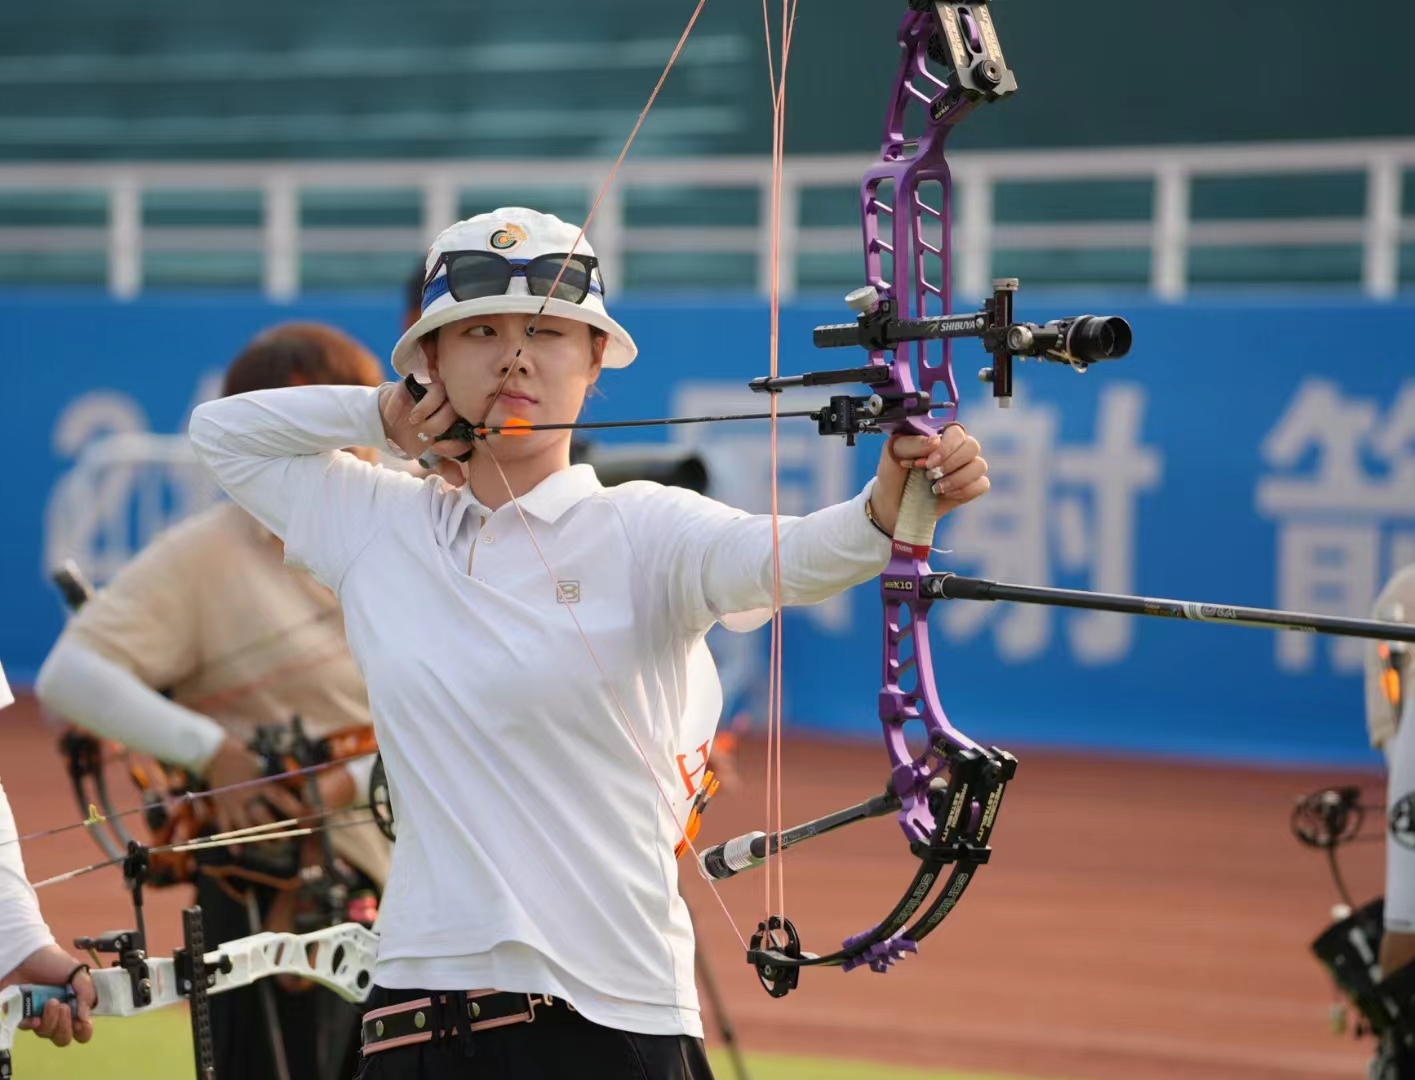 Sanlida Hero X10 achievements in the 2022 National Archery Olympic Championships